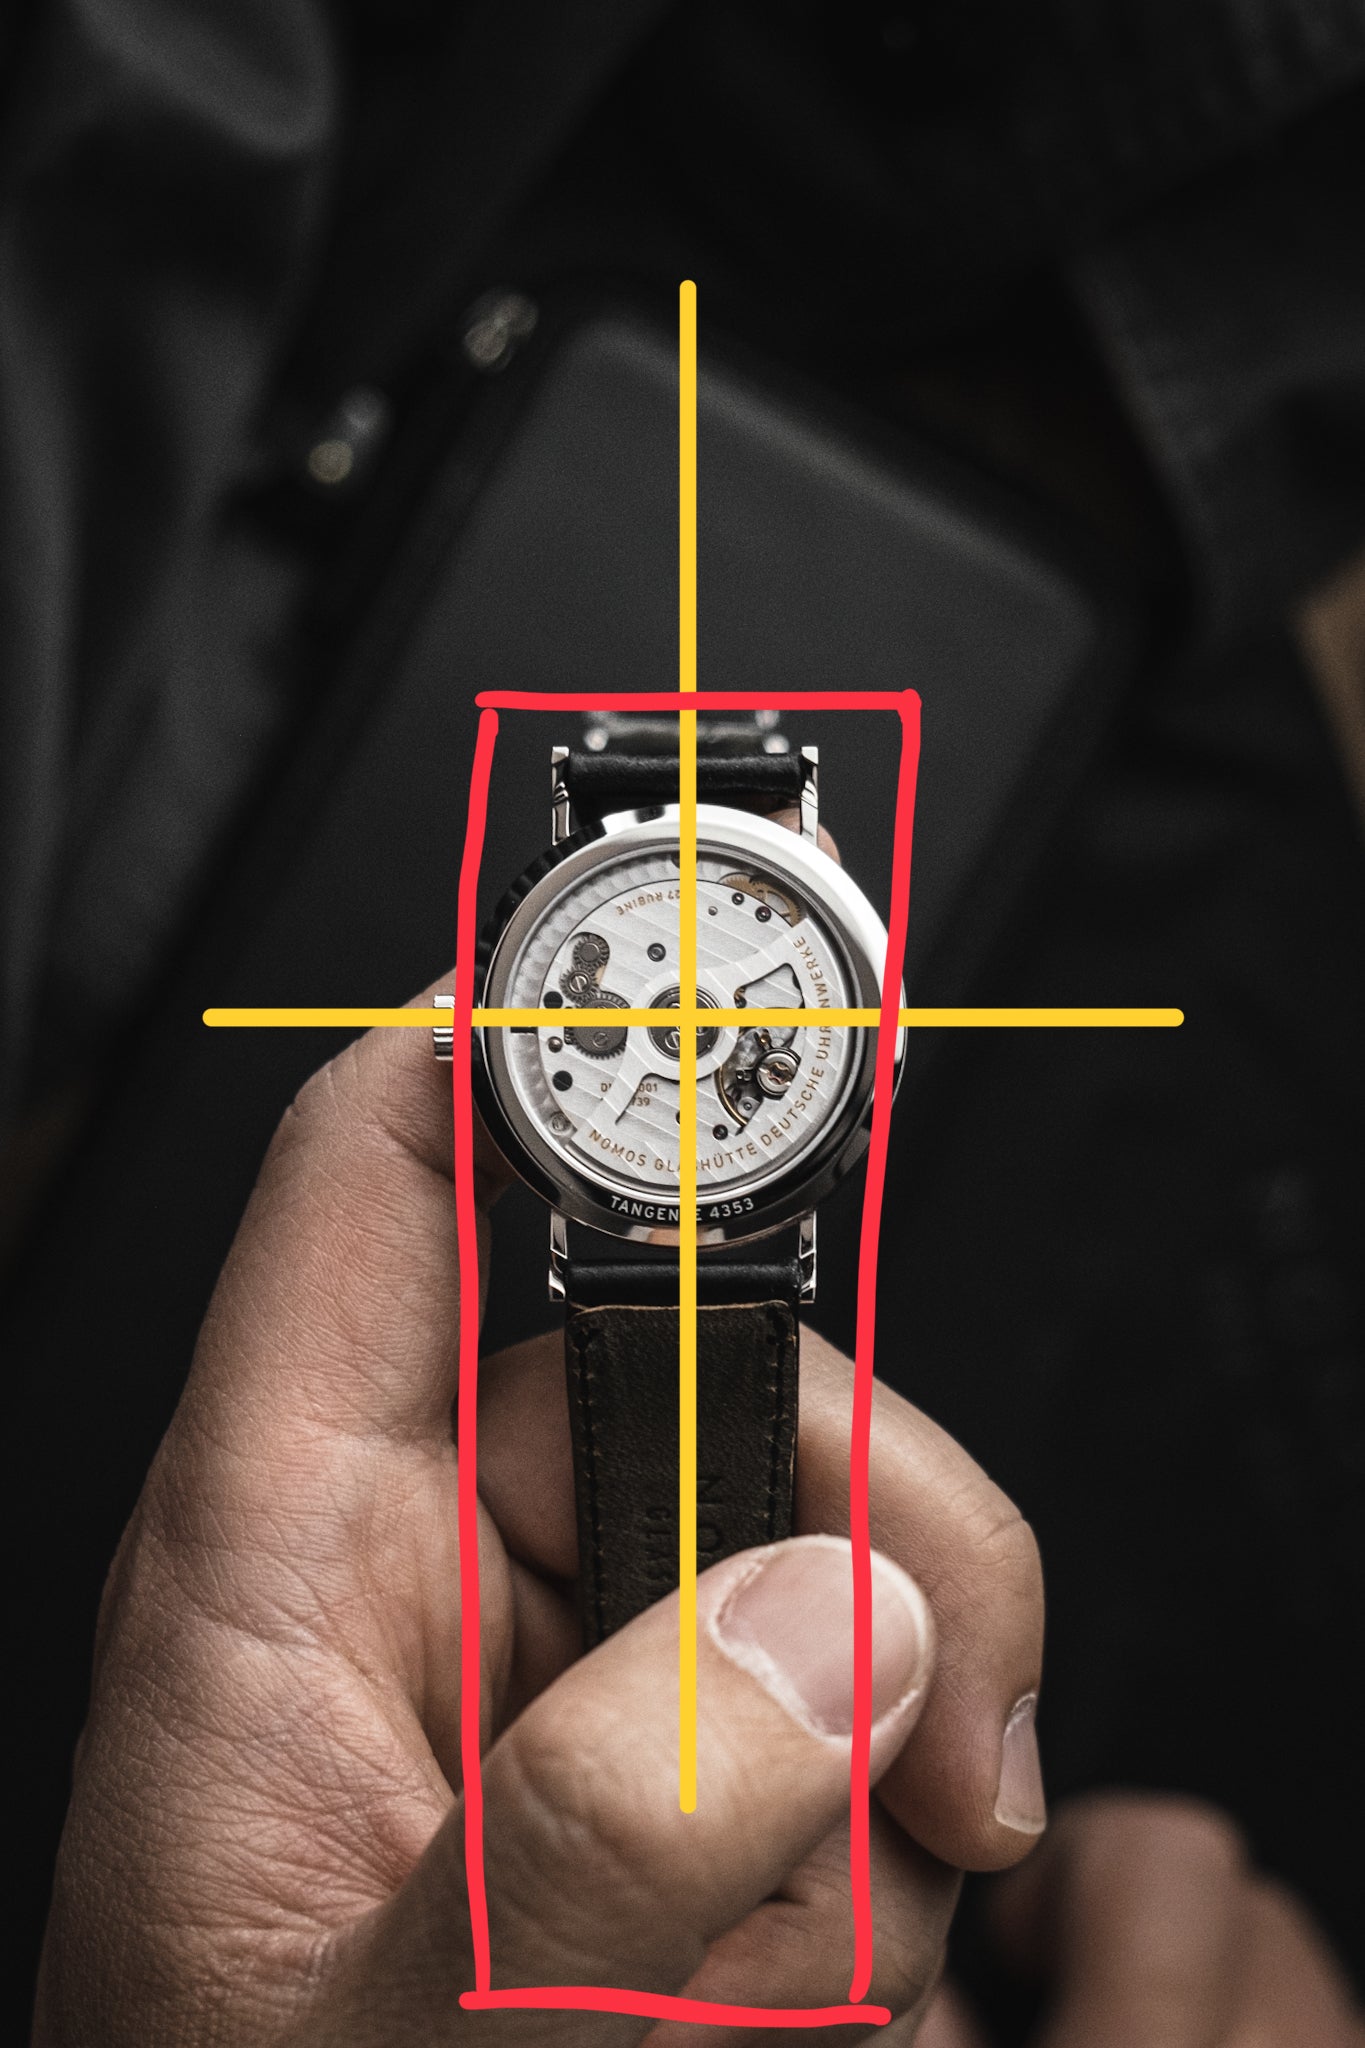 How to properly center a watch in your composition